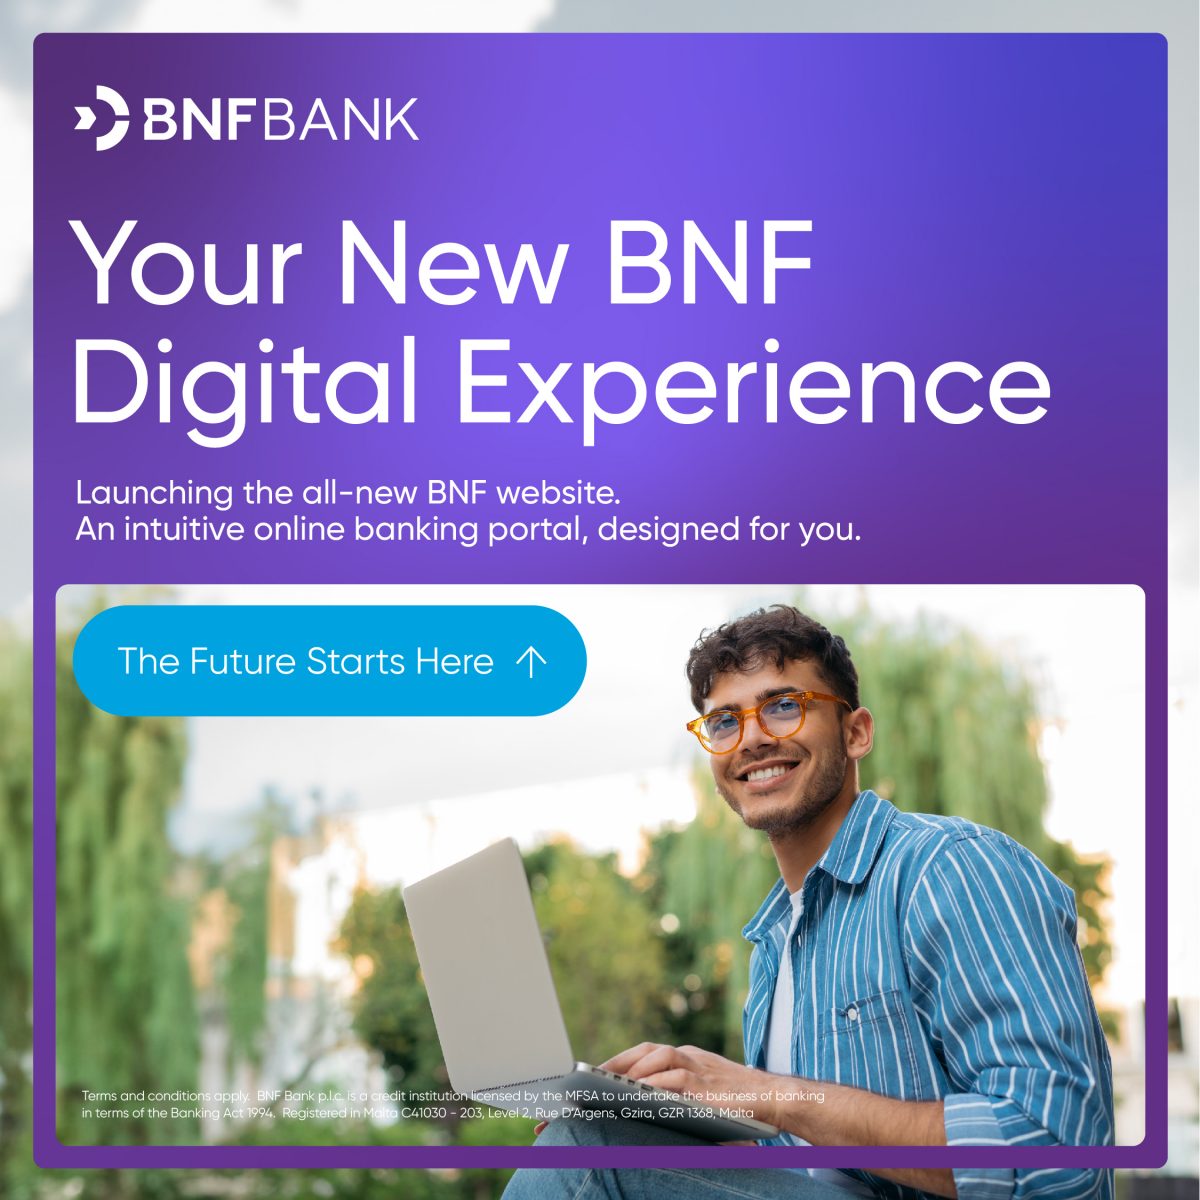 New Digital Experience For BNF Bank Customers